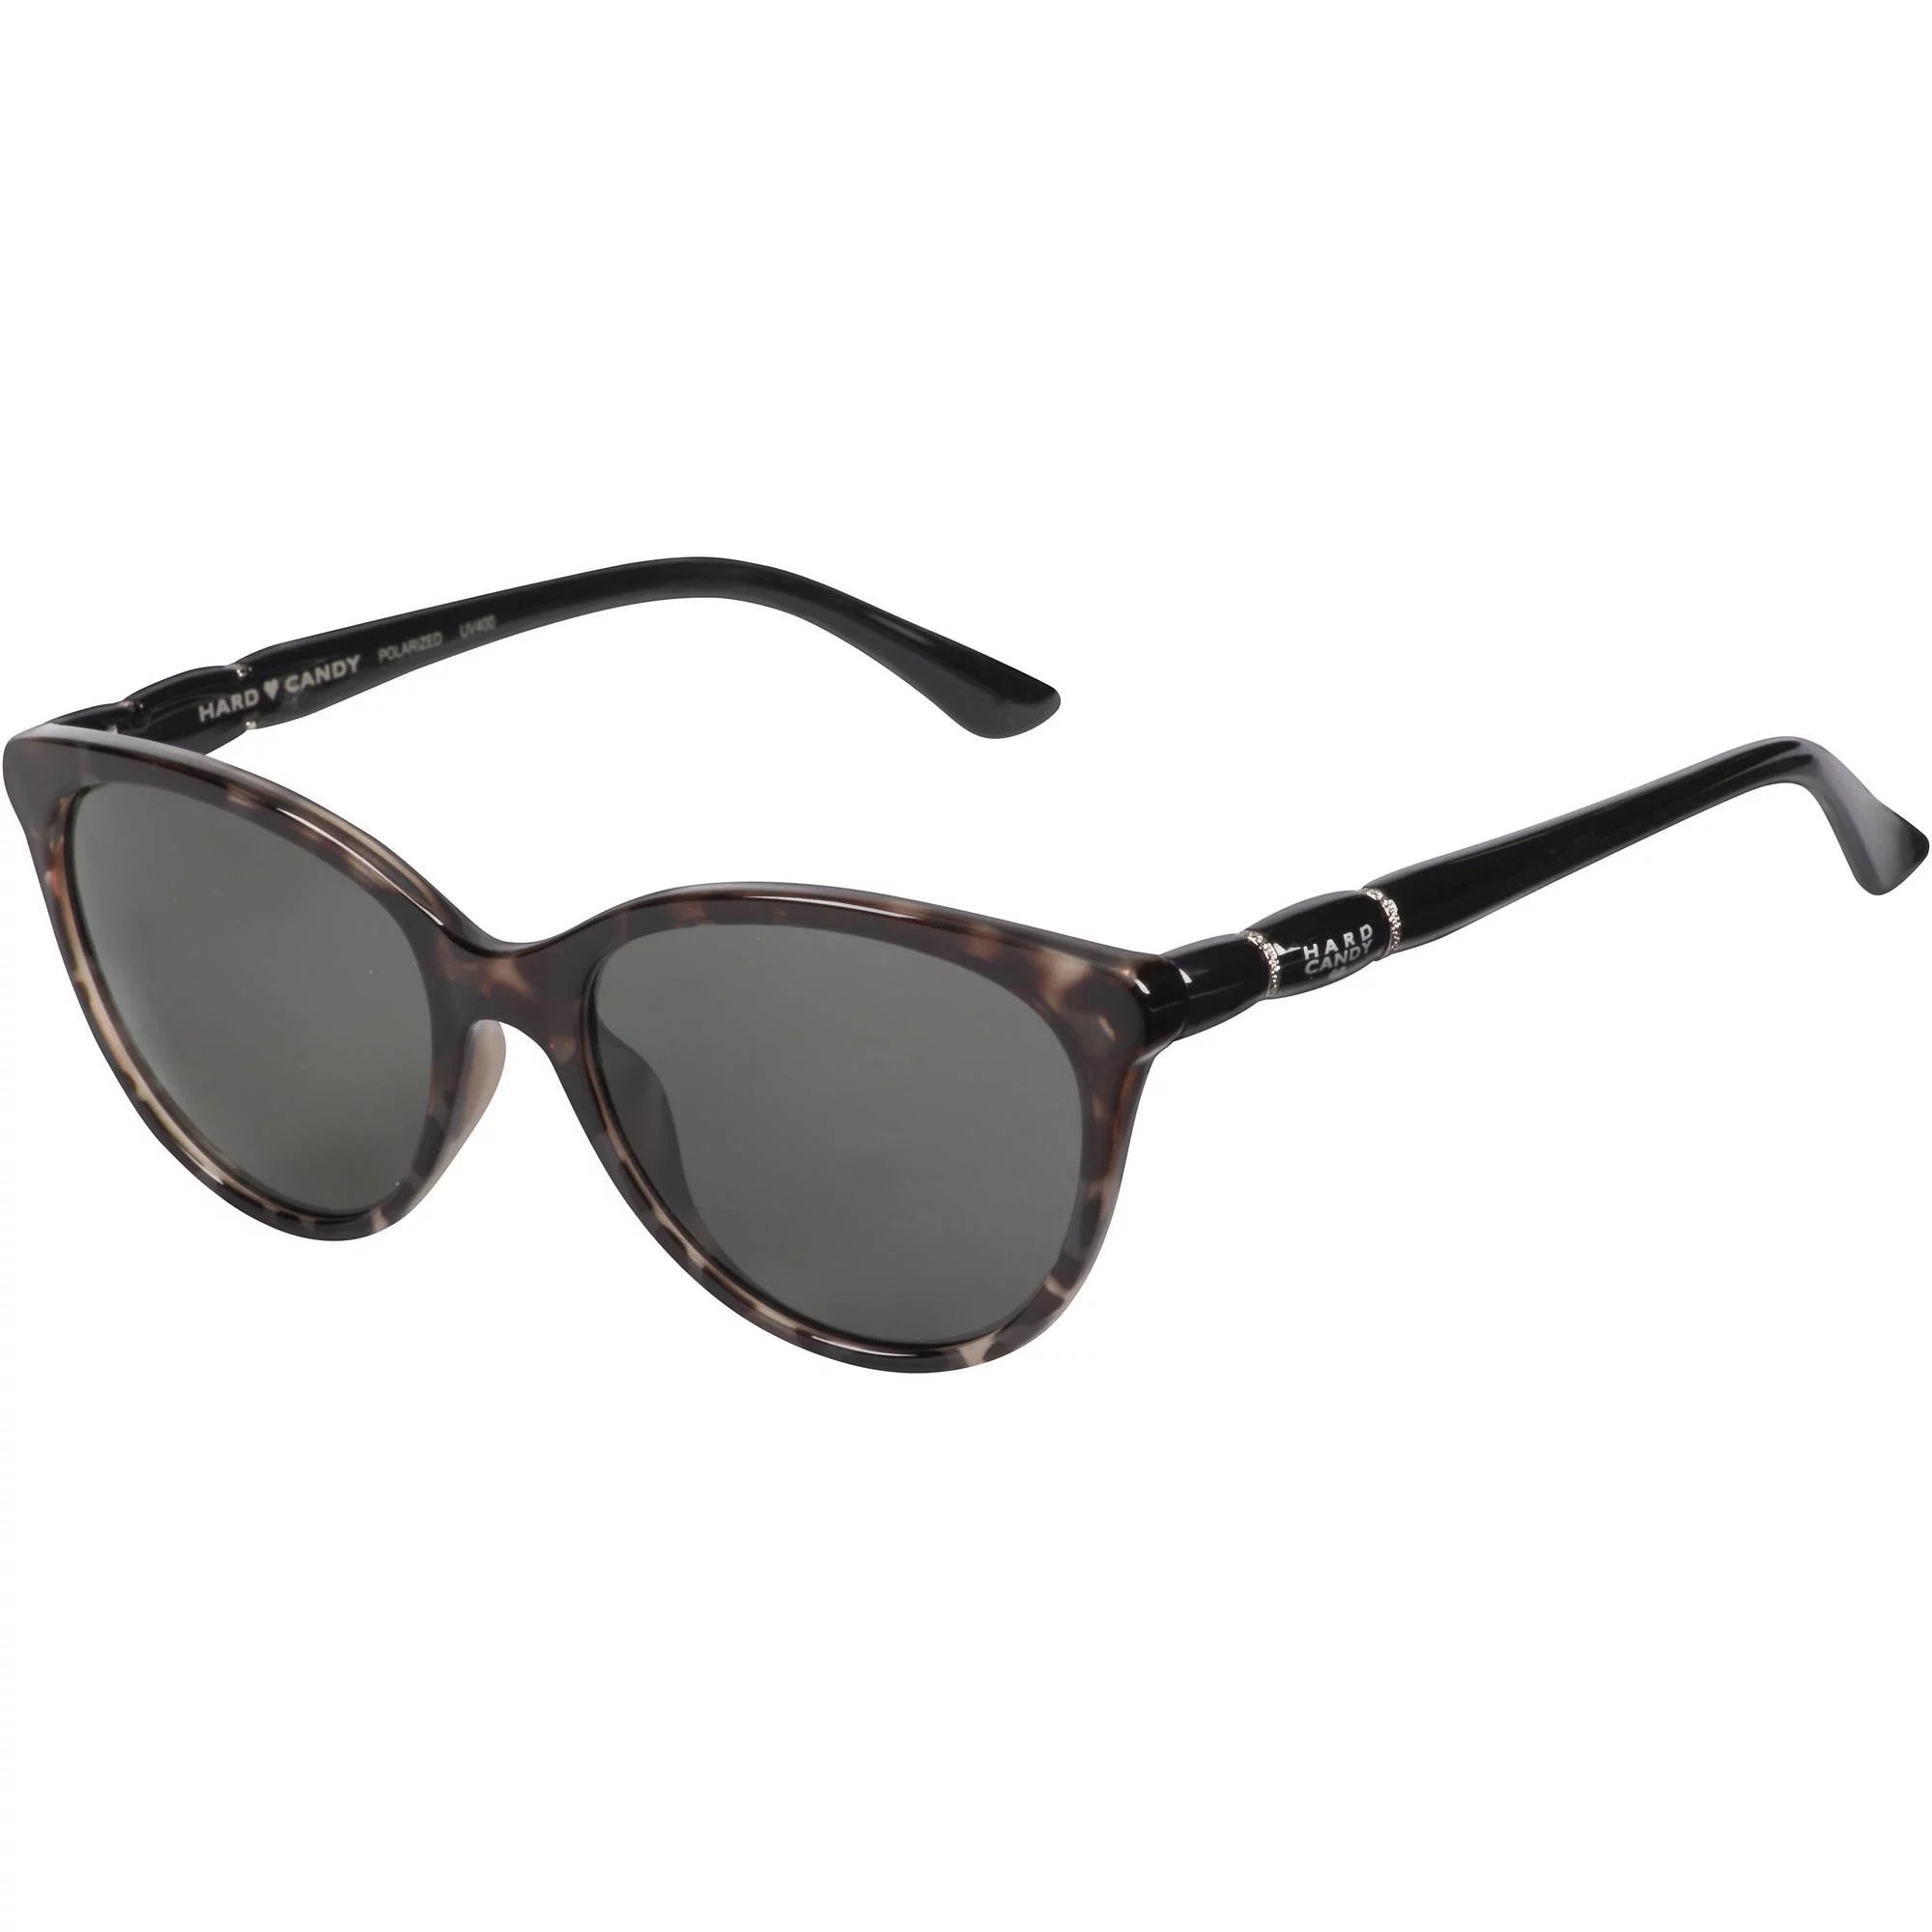 Hard Candy Womens Rx'able Sunglasses, Hs13, Black Tortoise Patterned, 55-18-142, with Case | Walmart (US)